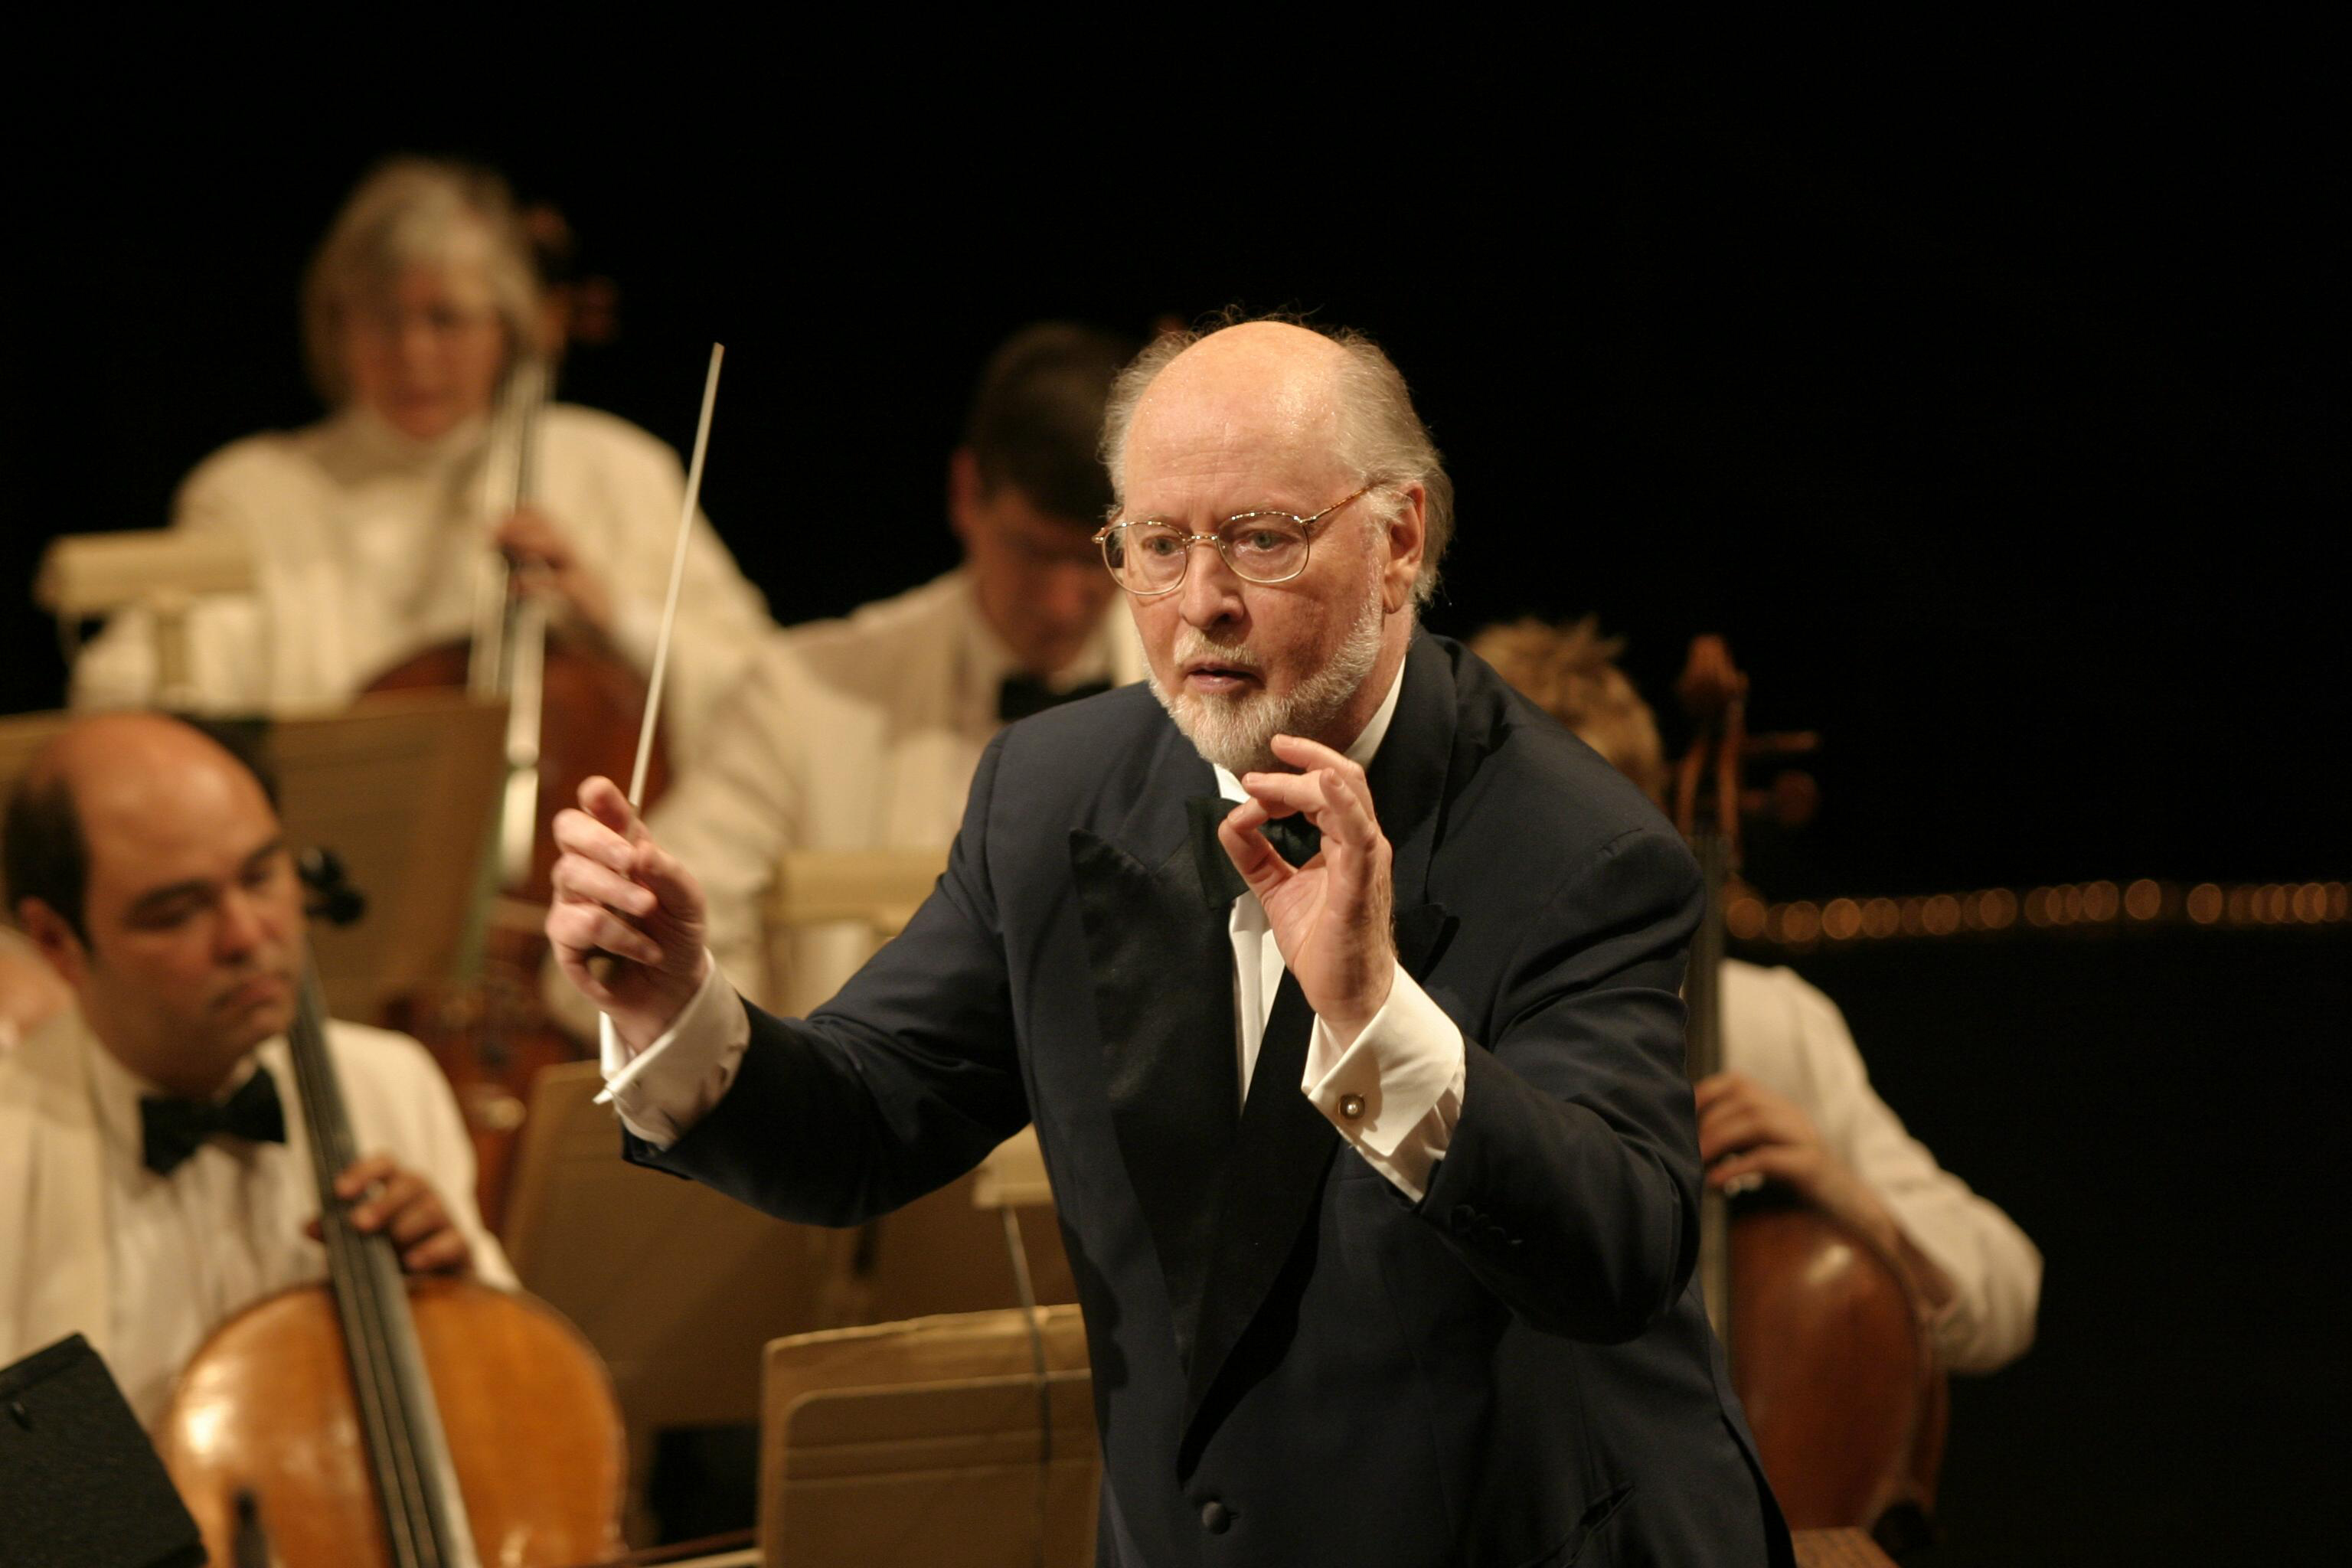 Star Wars Legend John Williams is Now Writing a Theme for Solo: A Star Wars Story